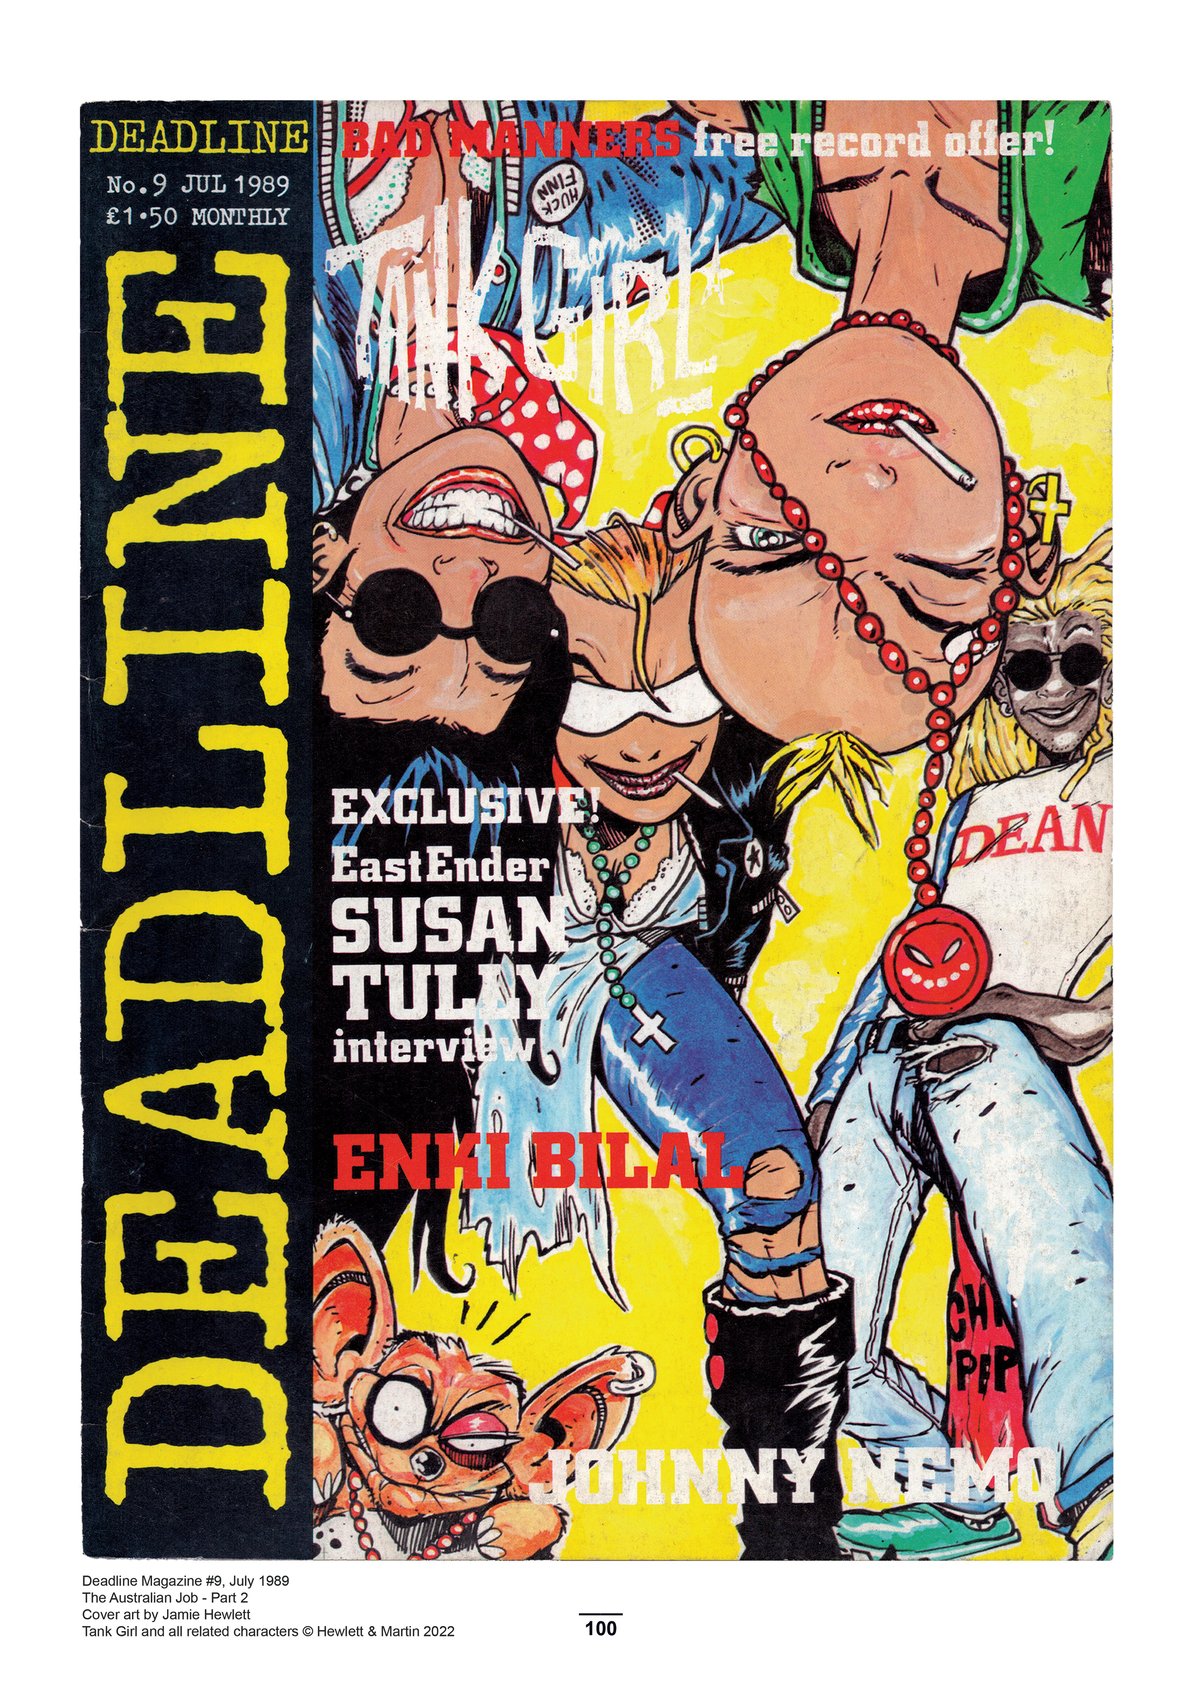 Image of TANK GIRL CCTBS POSTER MAGAZINE SPECIAL